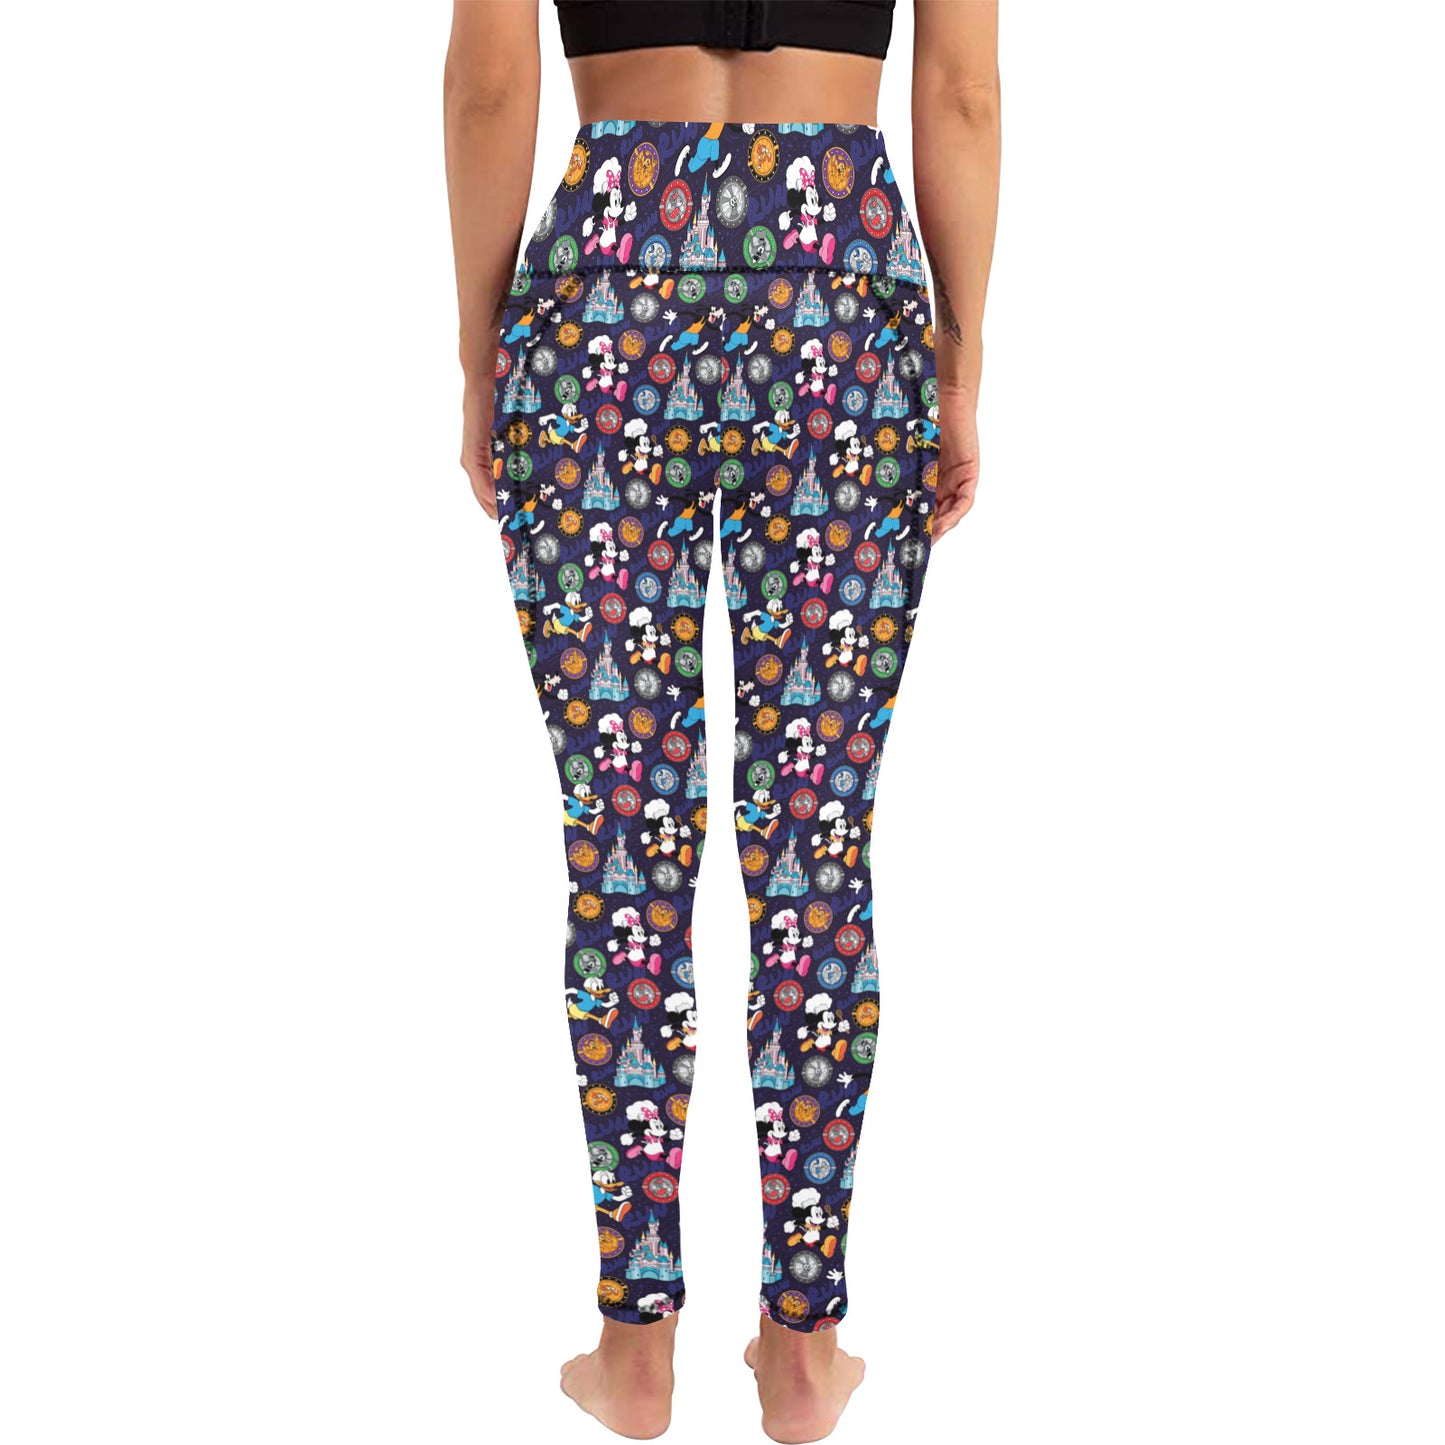 Mickey Wine And Dine Race Women's Athletic Leggings Wth Pockets